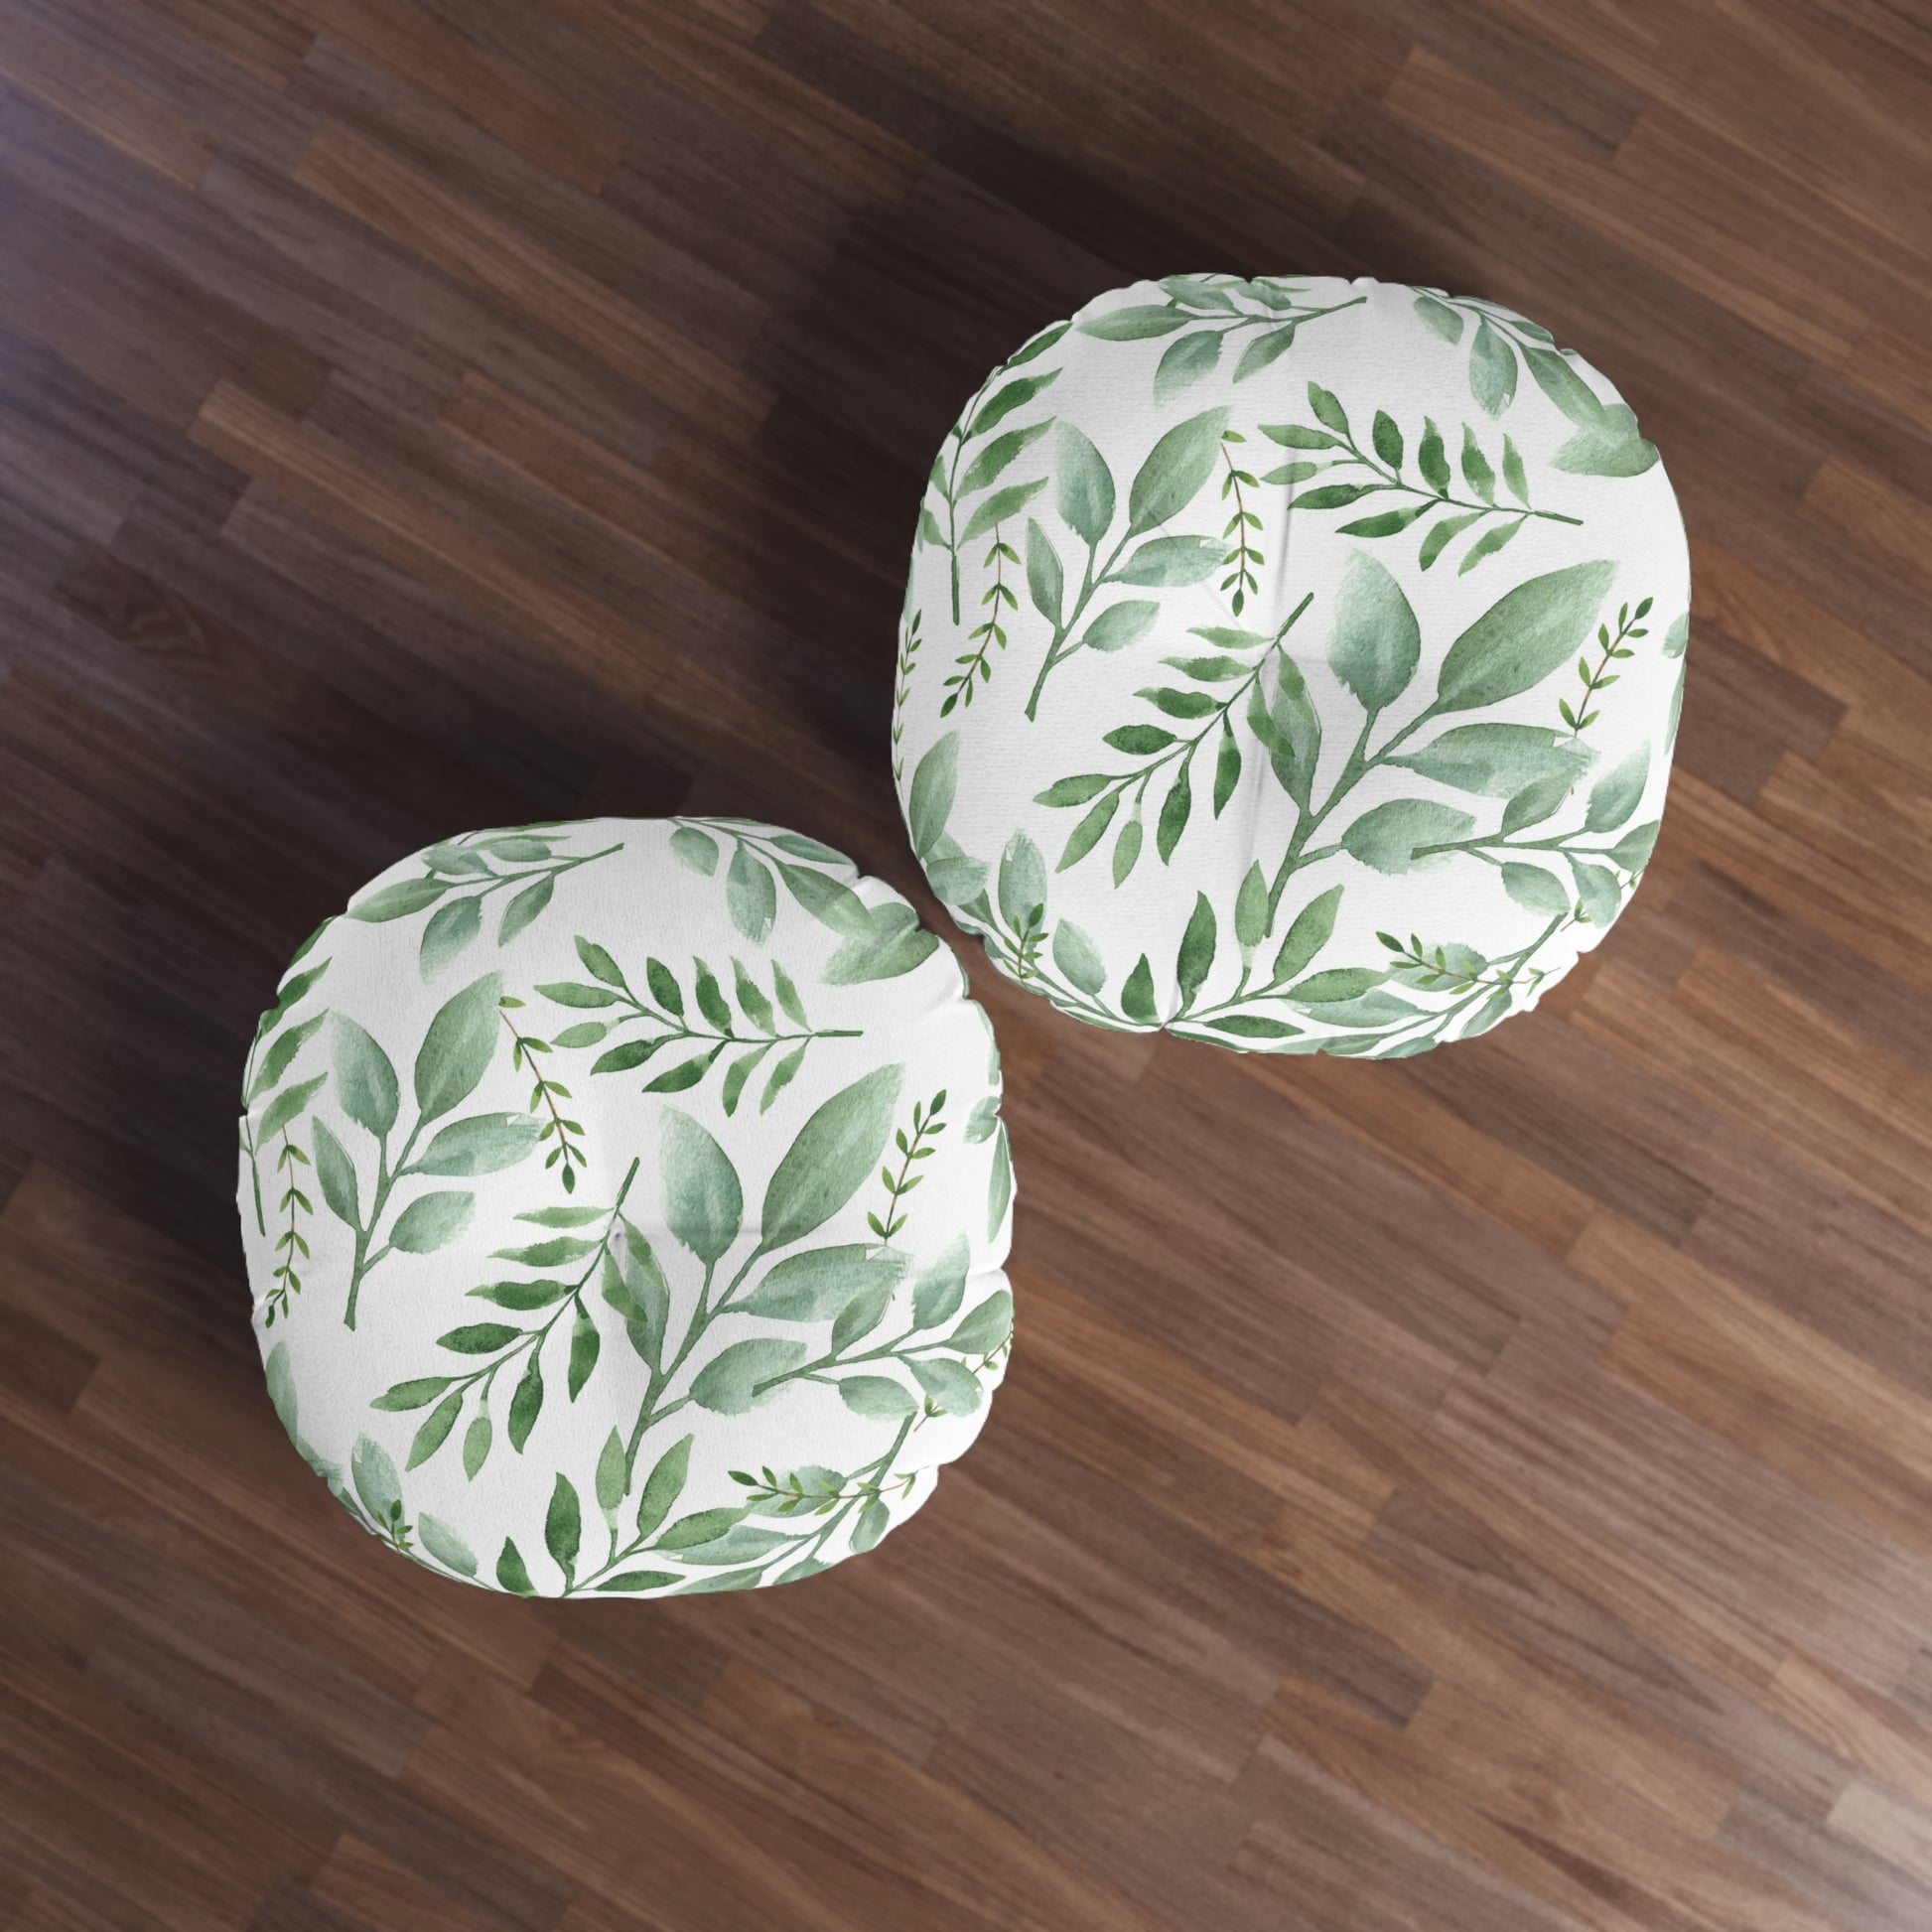 Two Printify round tufted floor-pillows with green botanical design on a wooden floor.